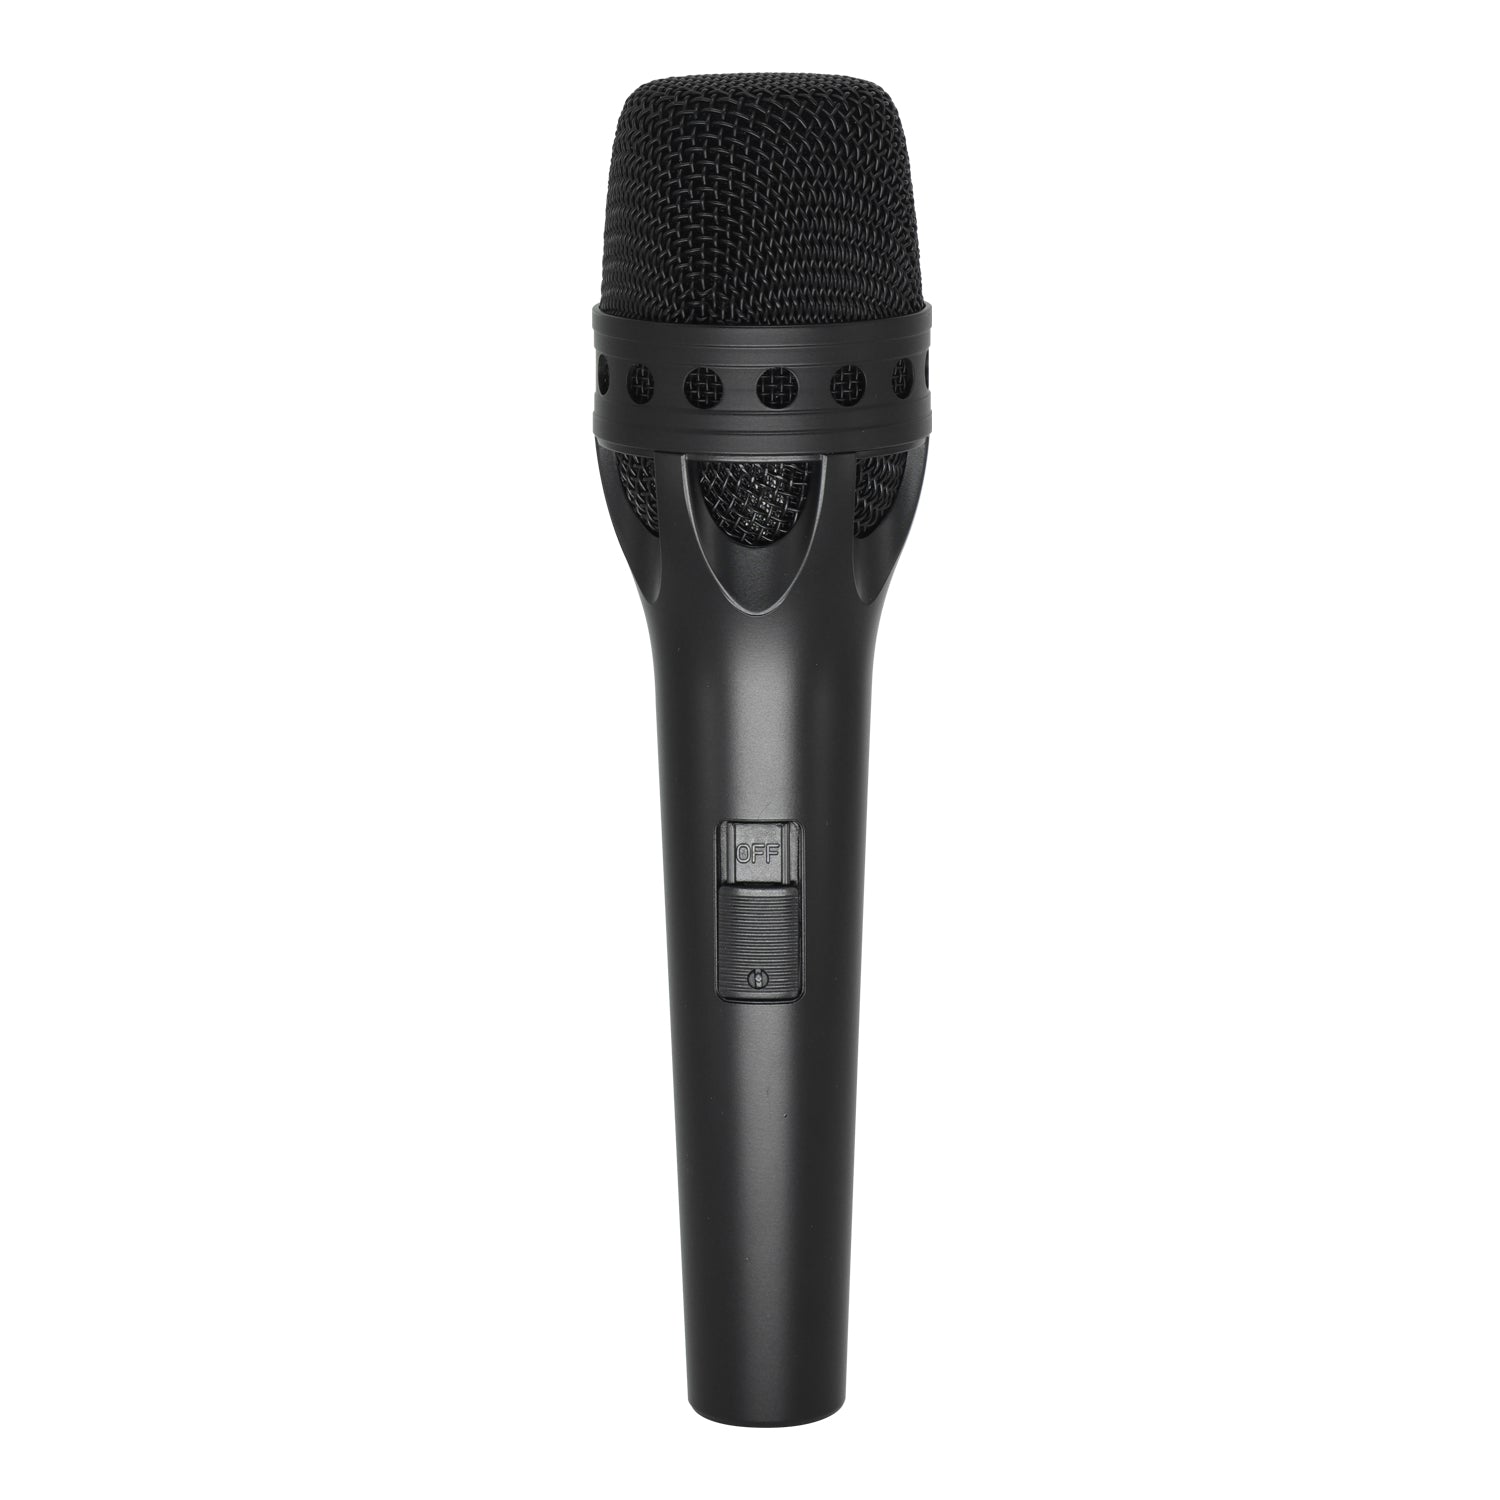 ERZHEN Dynamic Microphone For Dynamic Stage Performance Wired Microphone For Recording #PG71